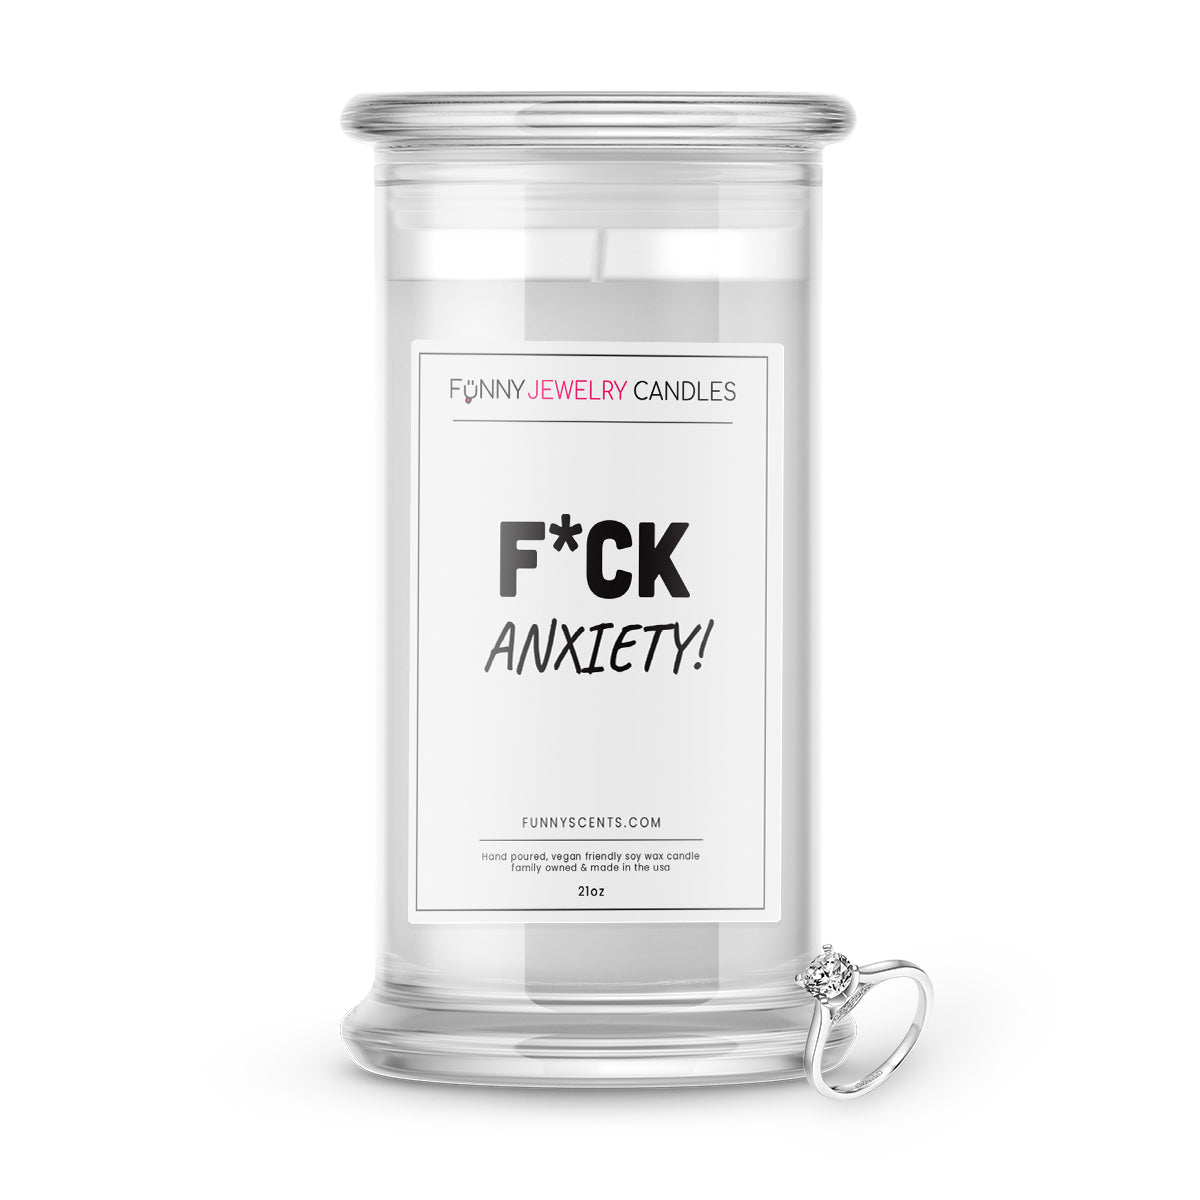 F*ck Anxiety! Jewelry Funny Candles